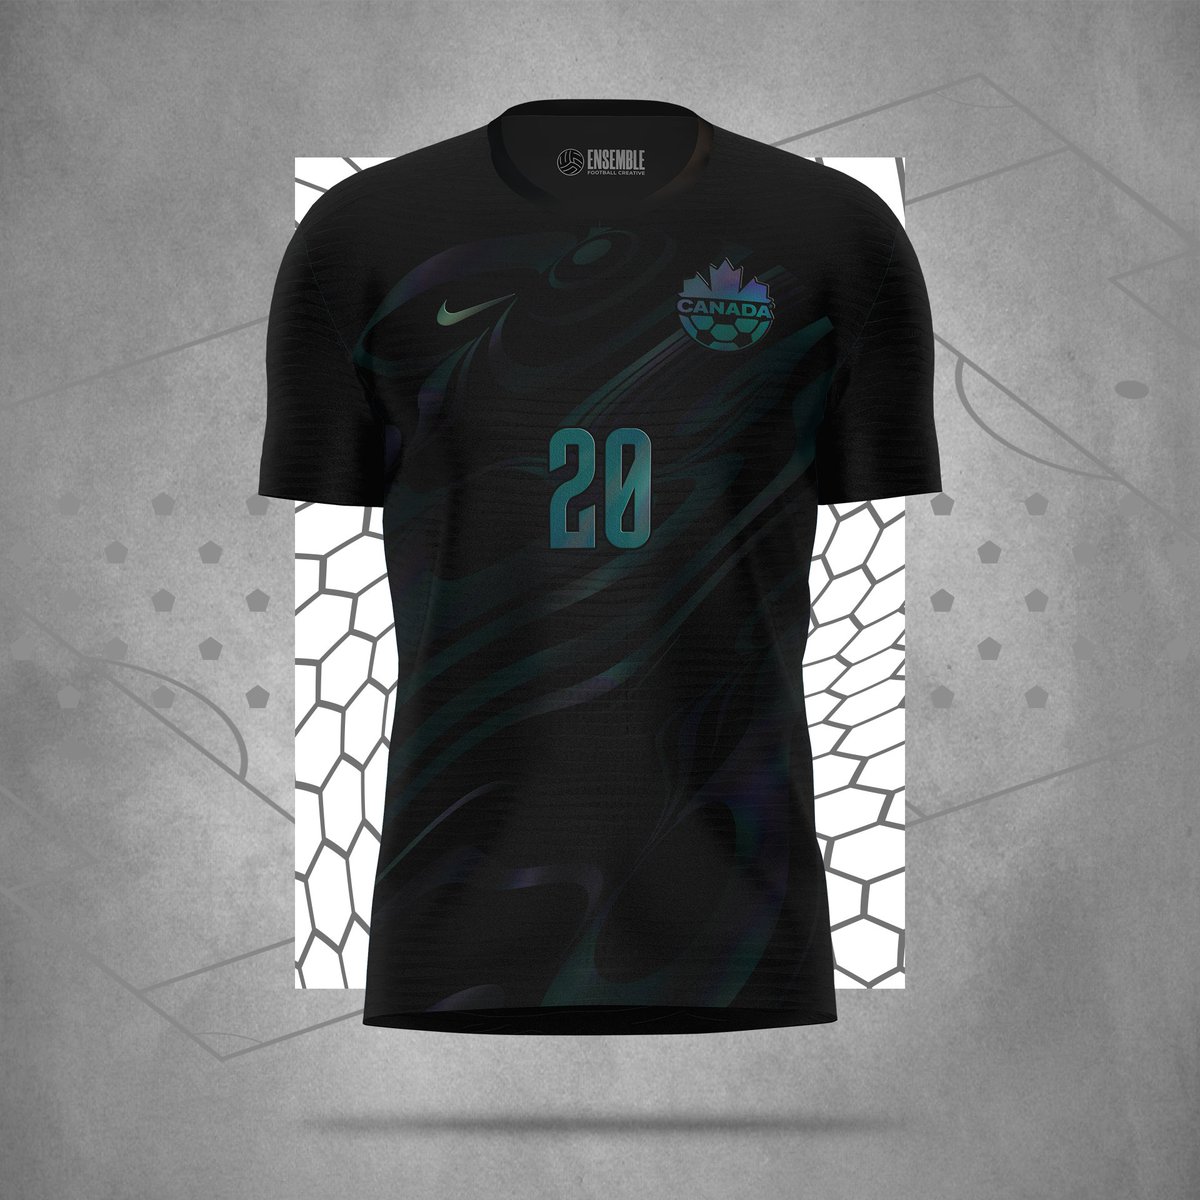 It's game day! We have reach the  
@FIFAWorldCup! We are in a new era. I've design a new third jersey for the occasion with an iridescent northern lights pattern. A NEW AURA  #CANMNT #CanadaSoccer 
@CanadaSoccerEN 

Thx to @Mike_Makahnouk for the theme.